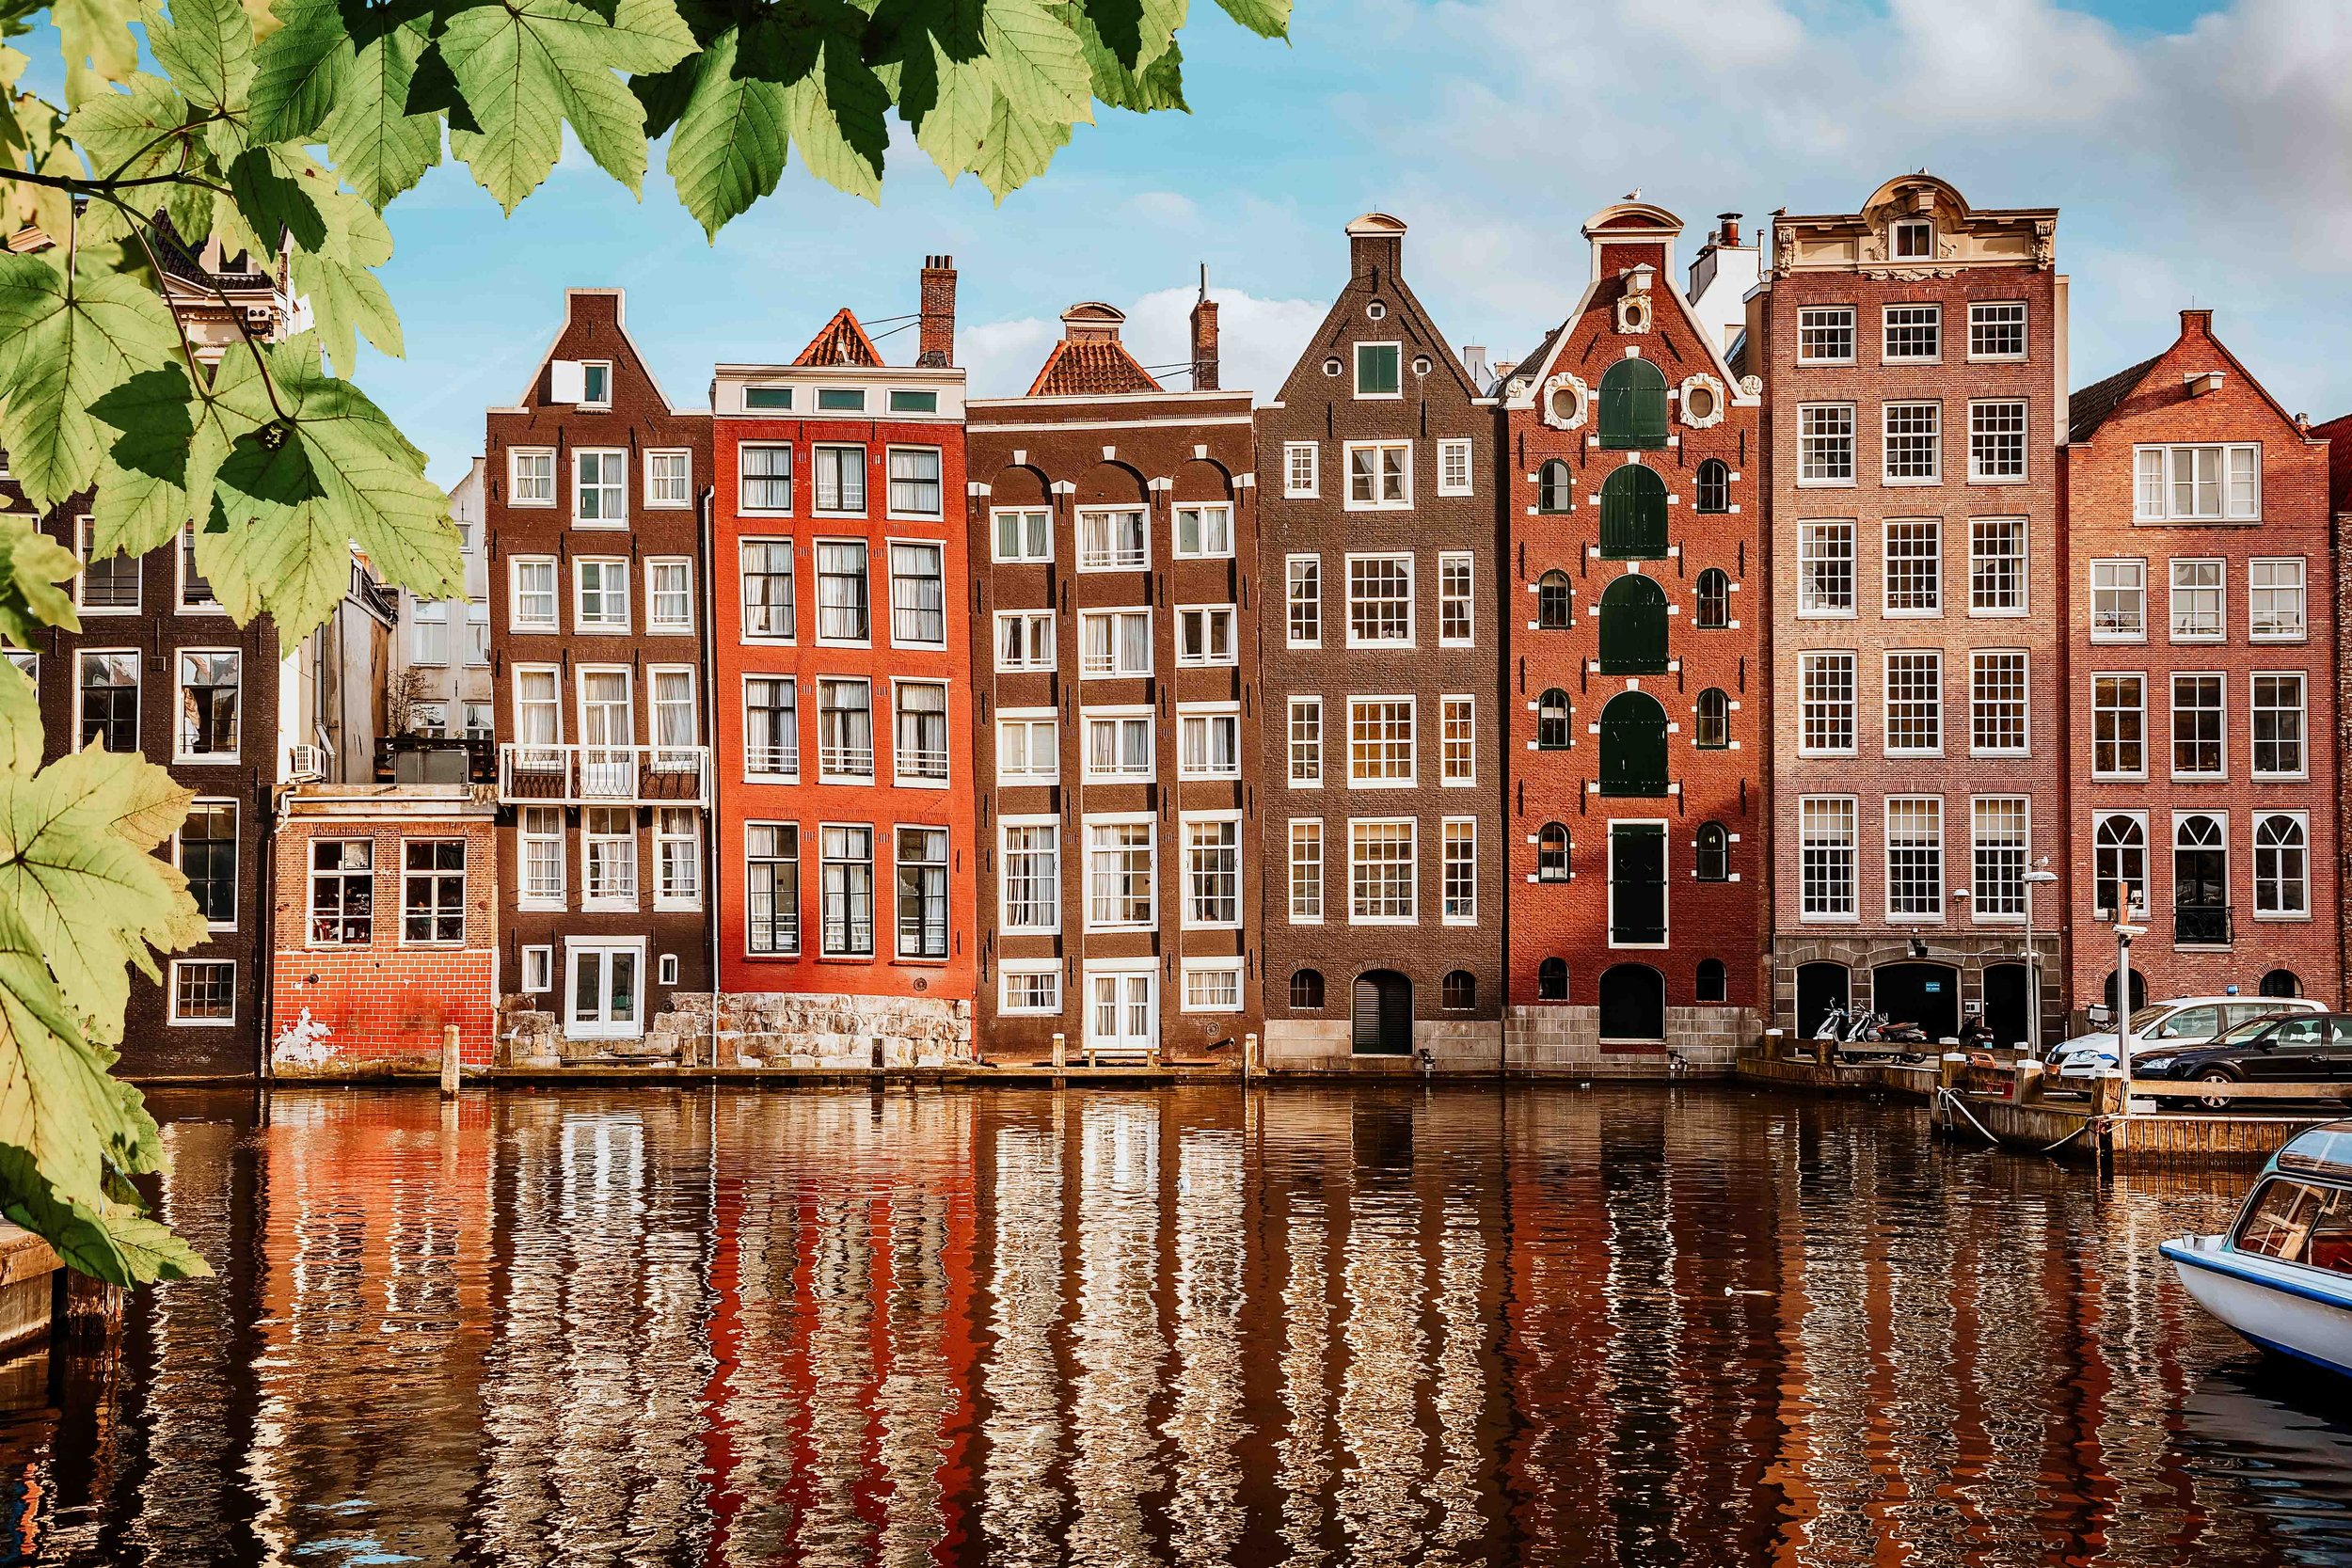 Colourful houses by the canals in Amsterdam on a 3 month Europe trip itinerary